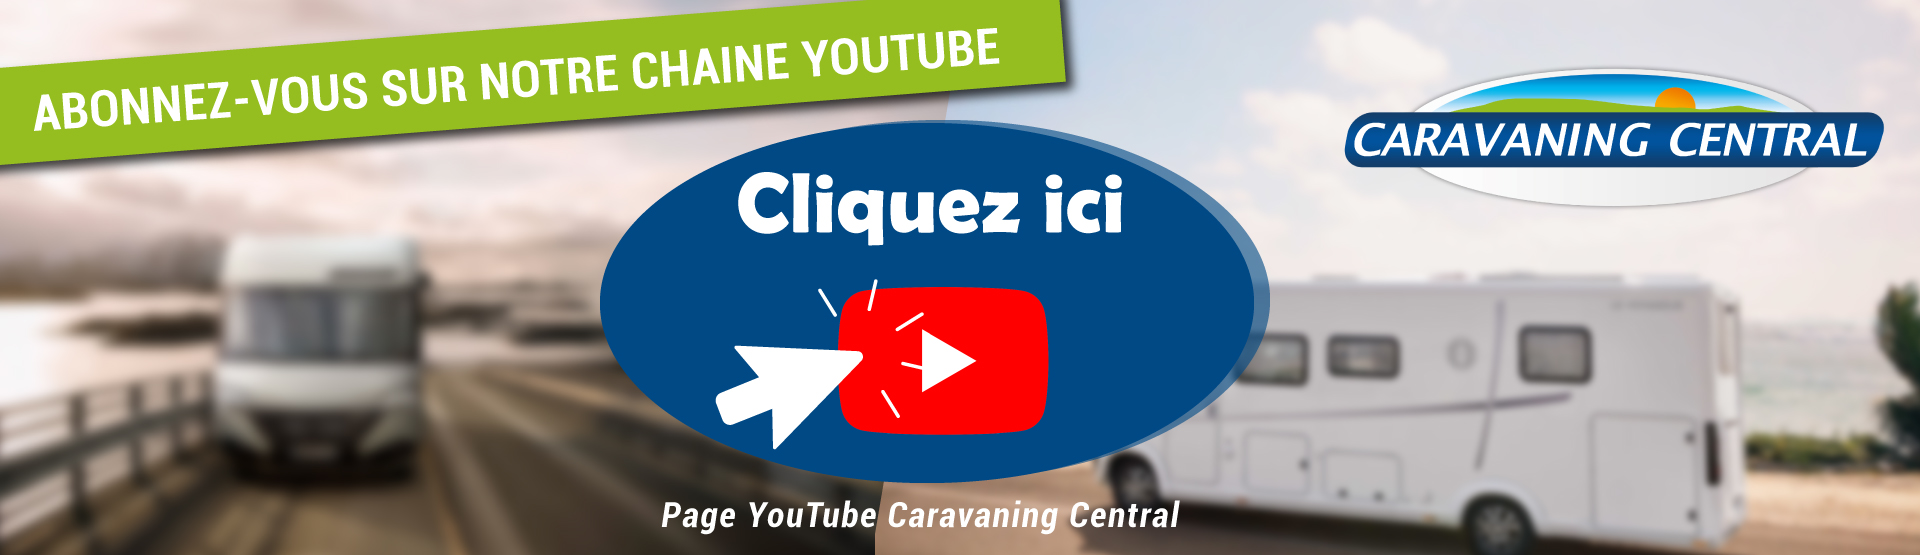 CHAINE YOUTUBE CARAVANING CENTRAL COUCHAGE